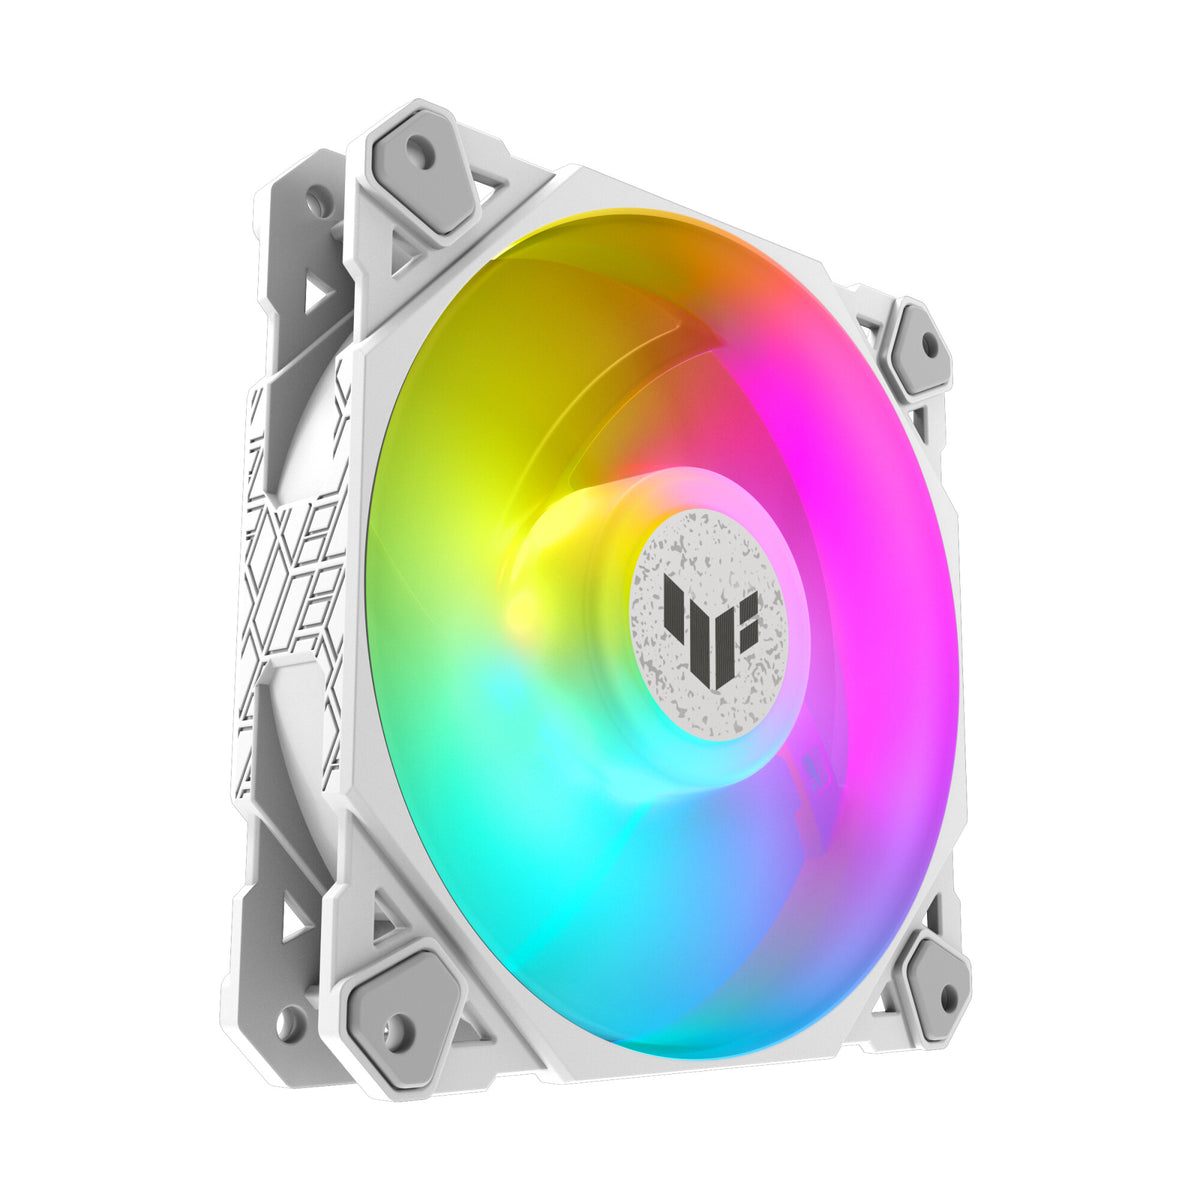 ASUS TUF GAMING TF120 ARGB - Computer Case Fan in White - 120mm (Pack of 3)